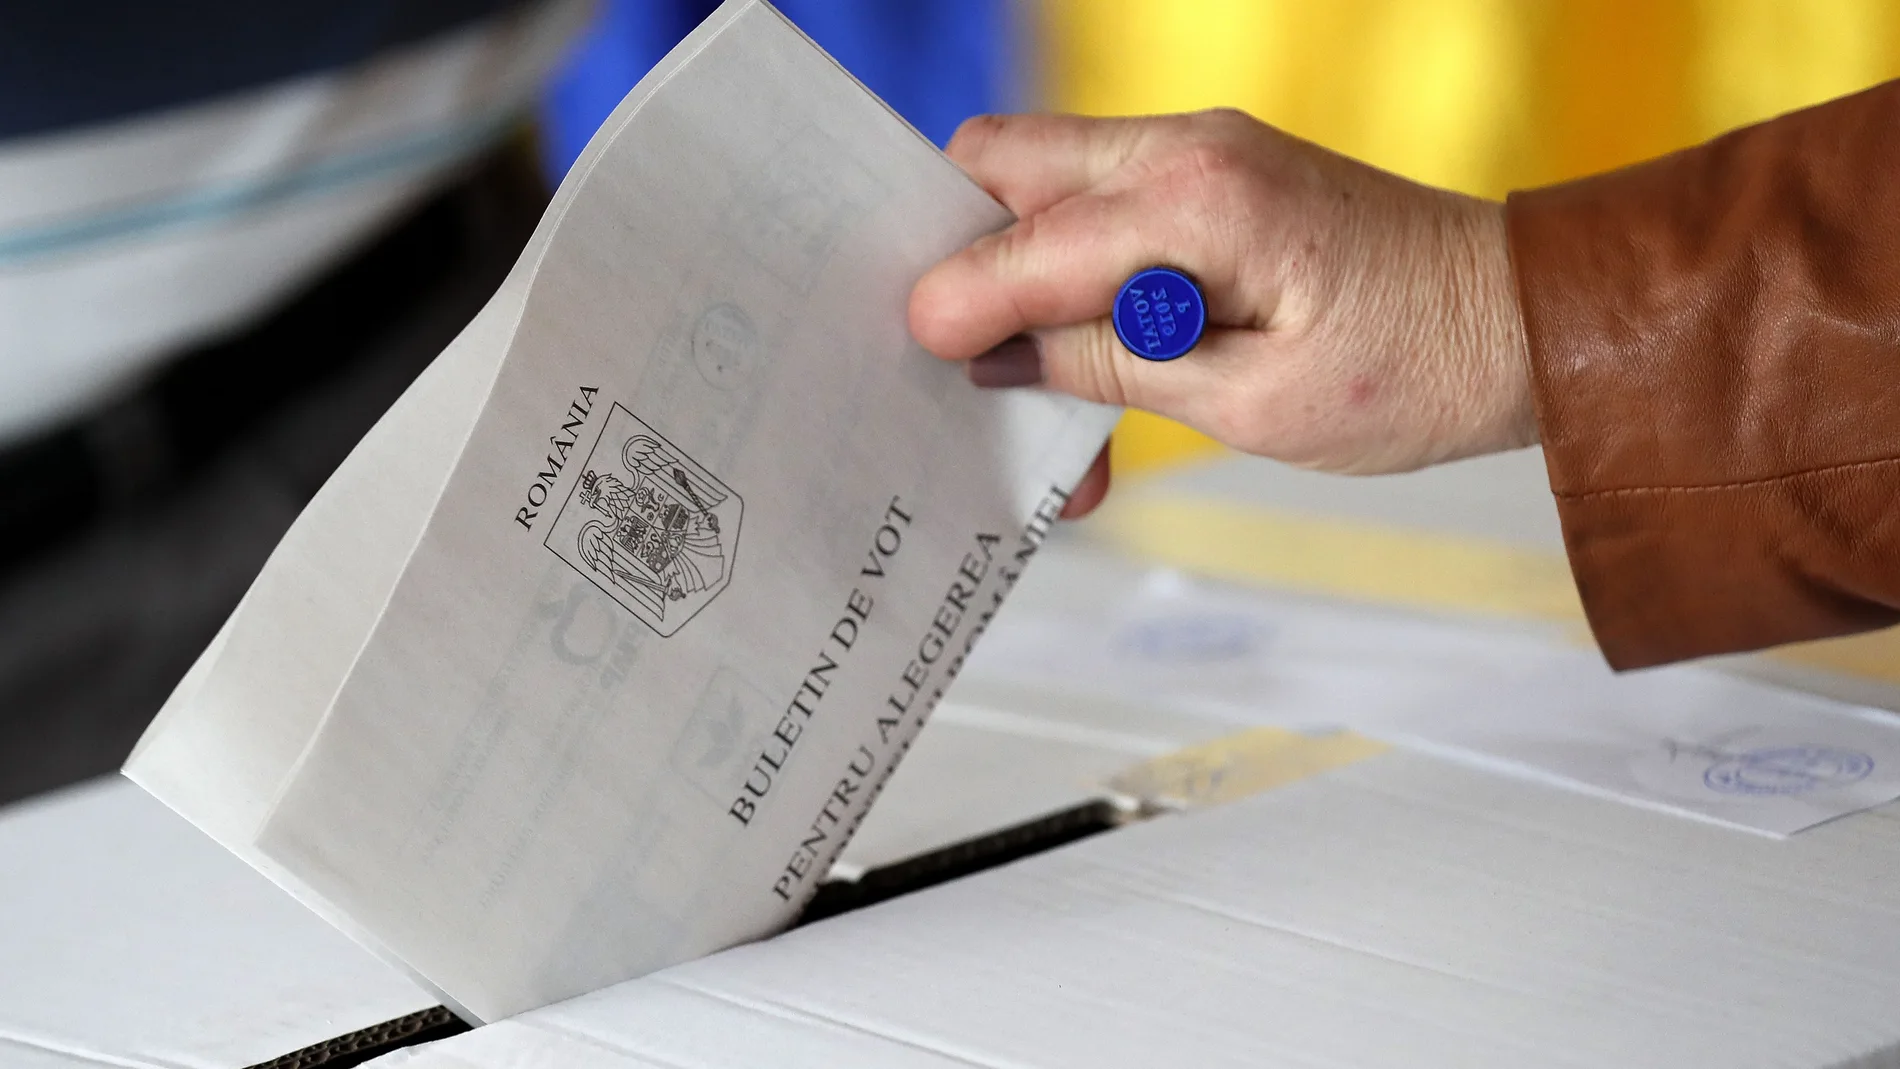 Romanians are voting for the first round of presidential elections